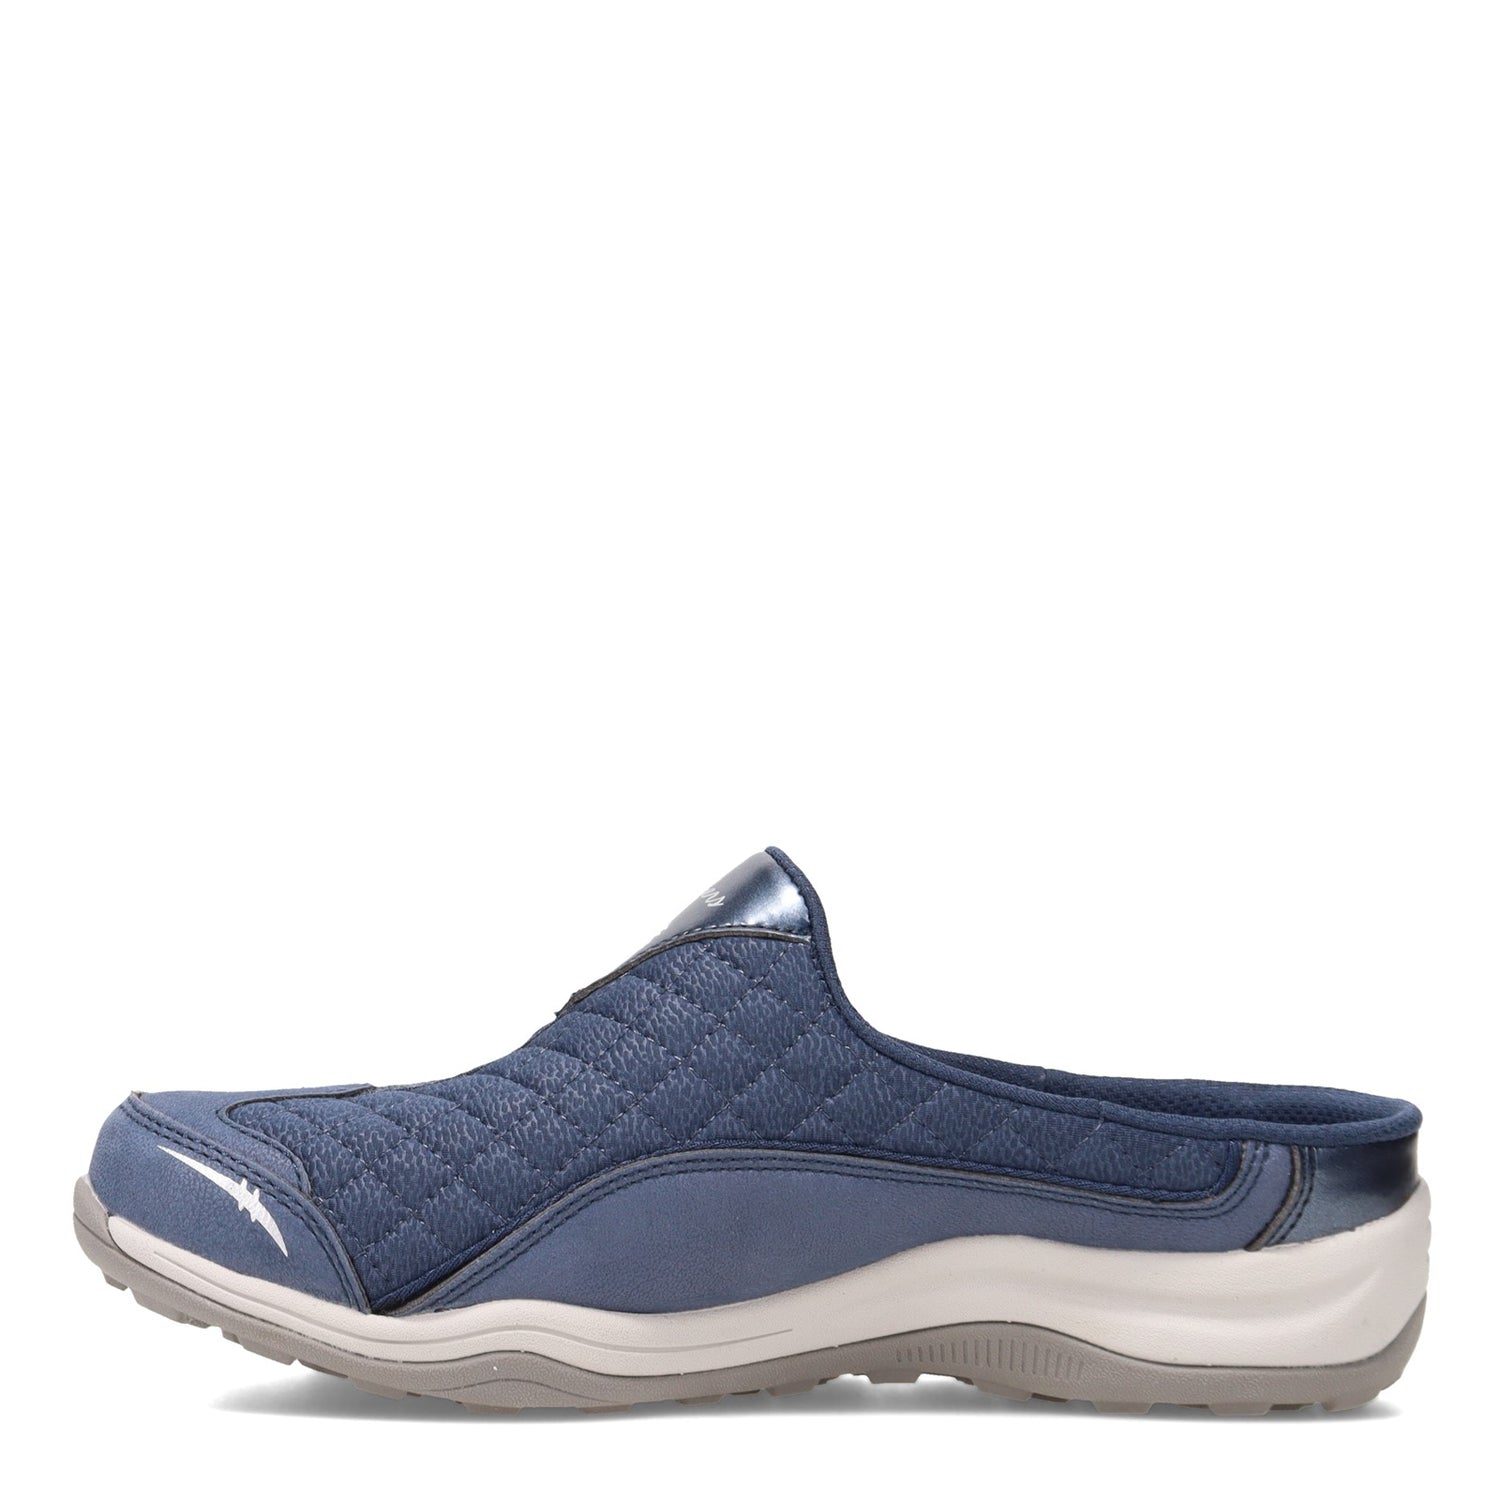 Peltz Shoes  Women's Skechers Relaxed Fit: Arch Fit - Commute Clog Navy 100322-NVY